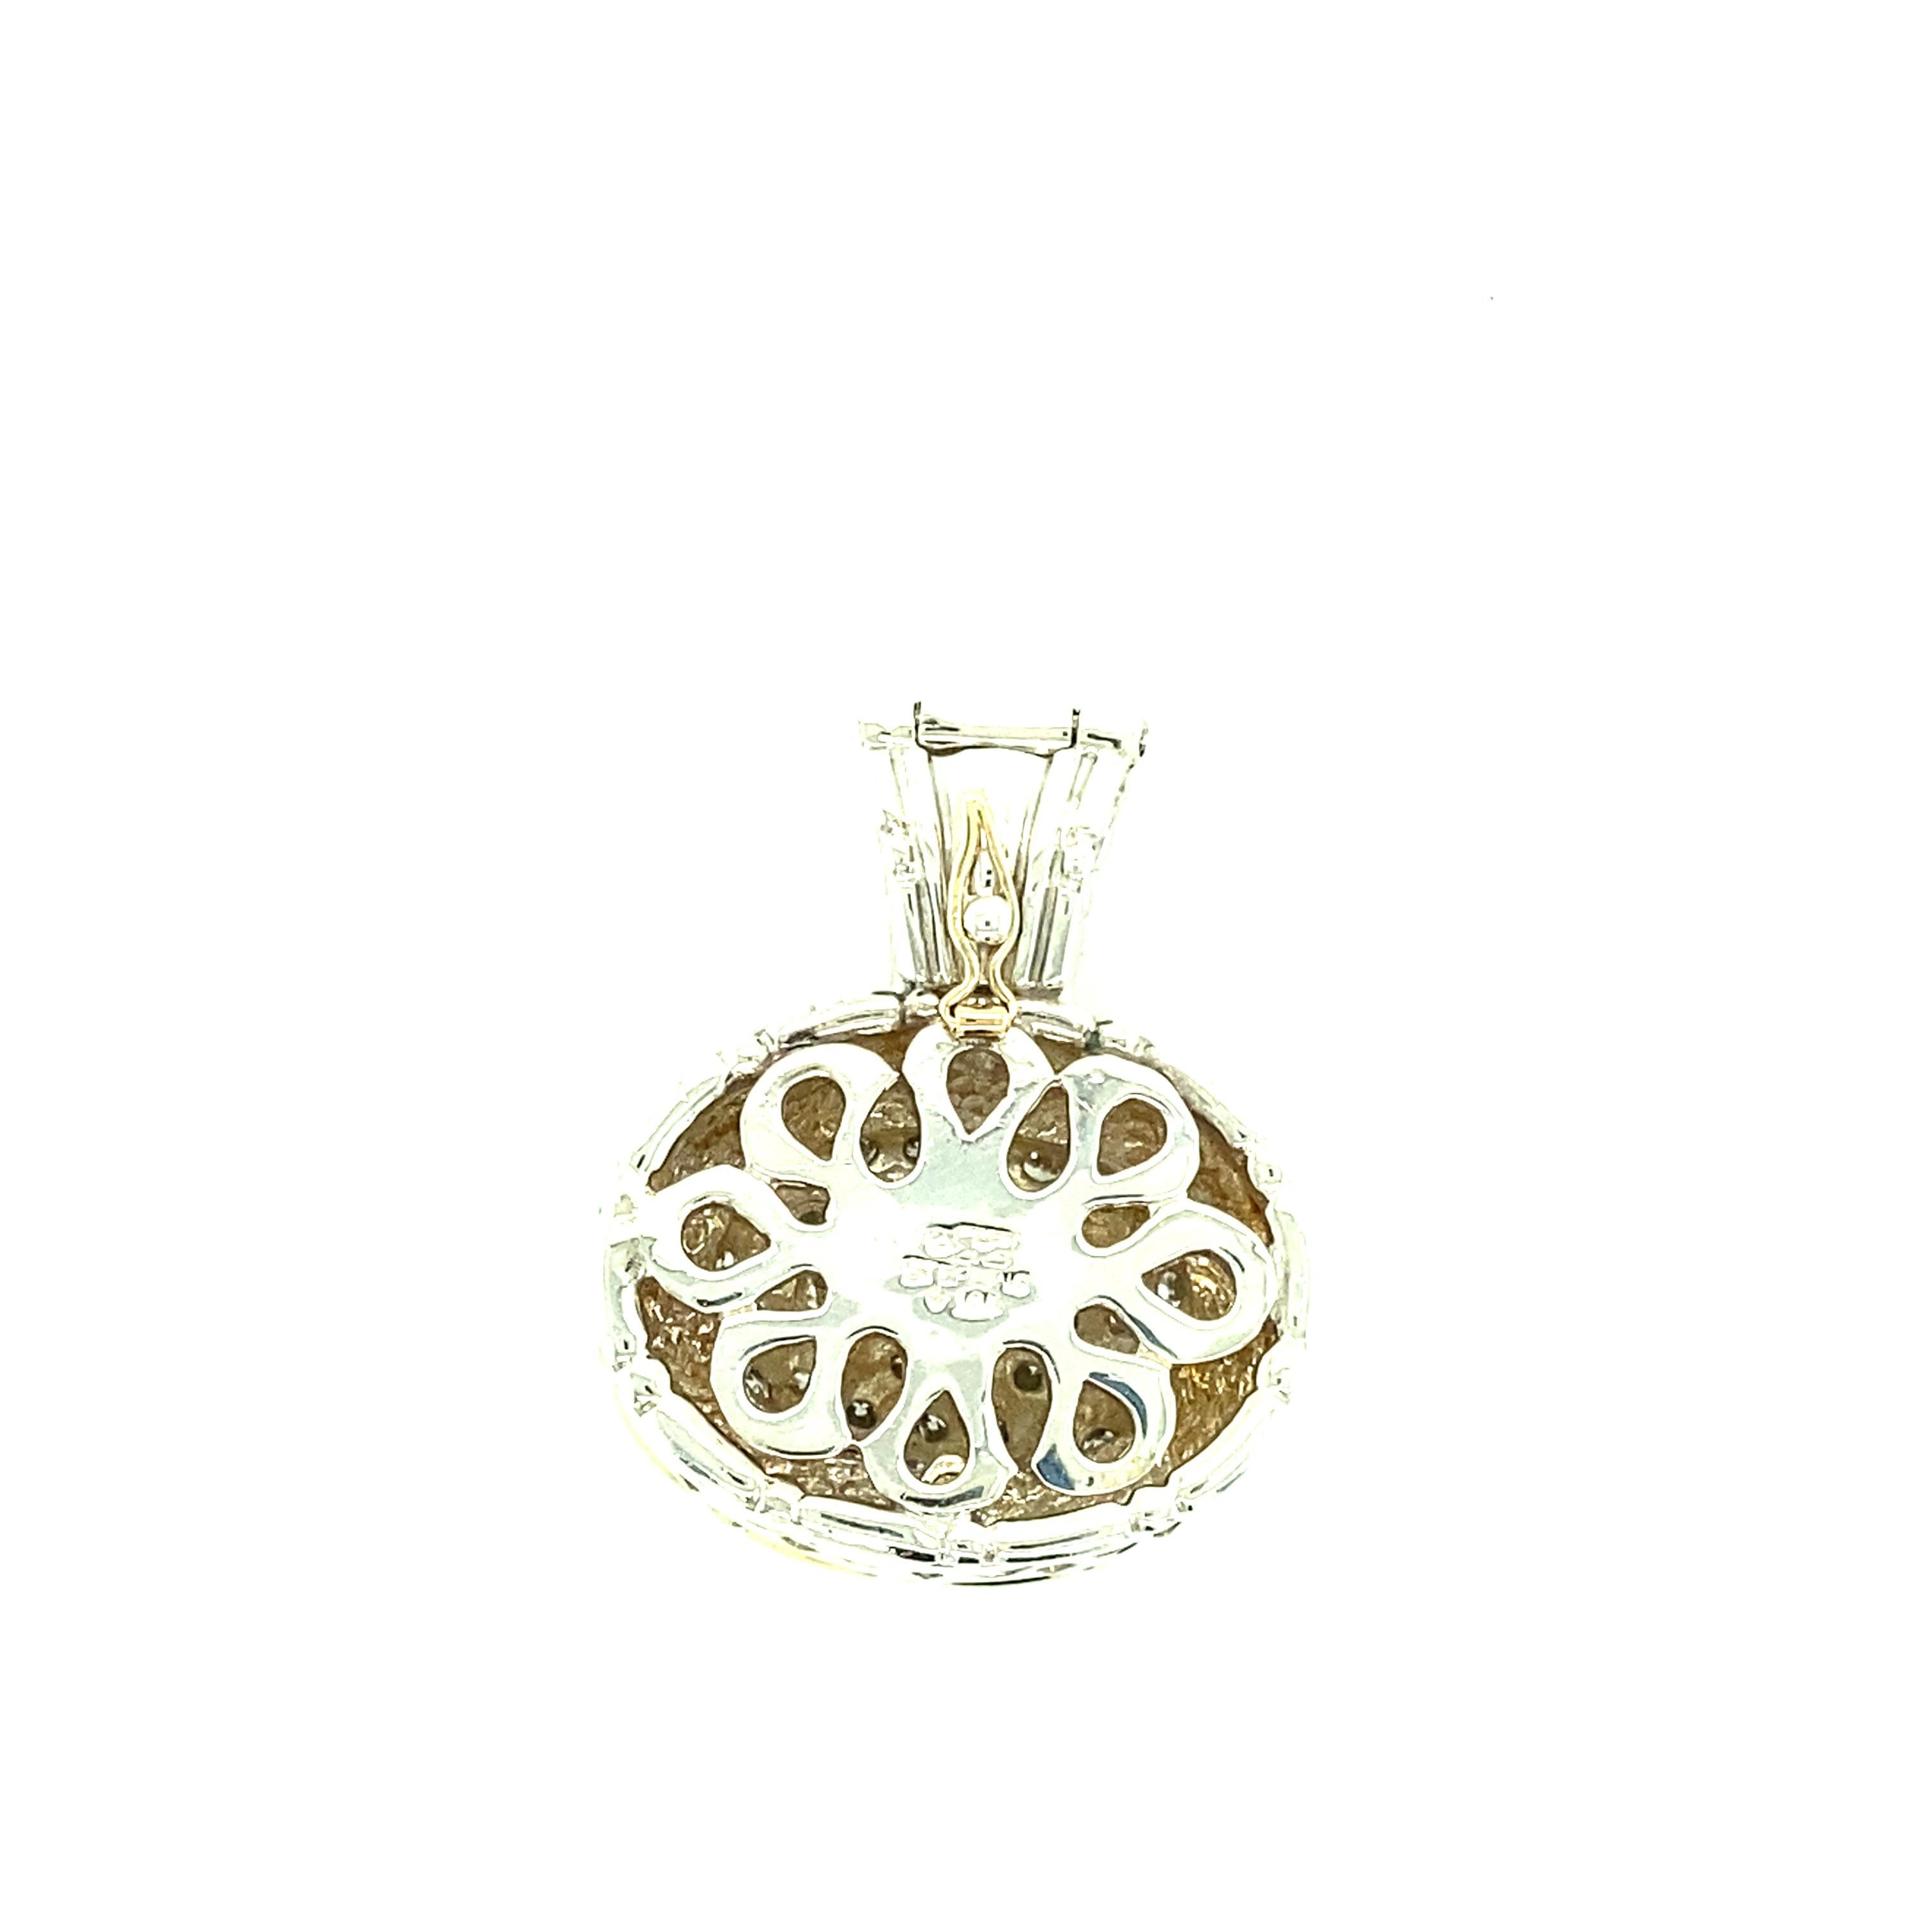 One 18 karat yellow gold and sterling silver (stamped Sterling & 18K) estate pendant set with forty-four brilliant cut diamonds, 1.20 carats total weight with matching I/J color and SI clarity.  The pendant measures 1.25 inches long and one inch